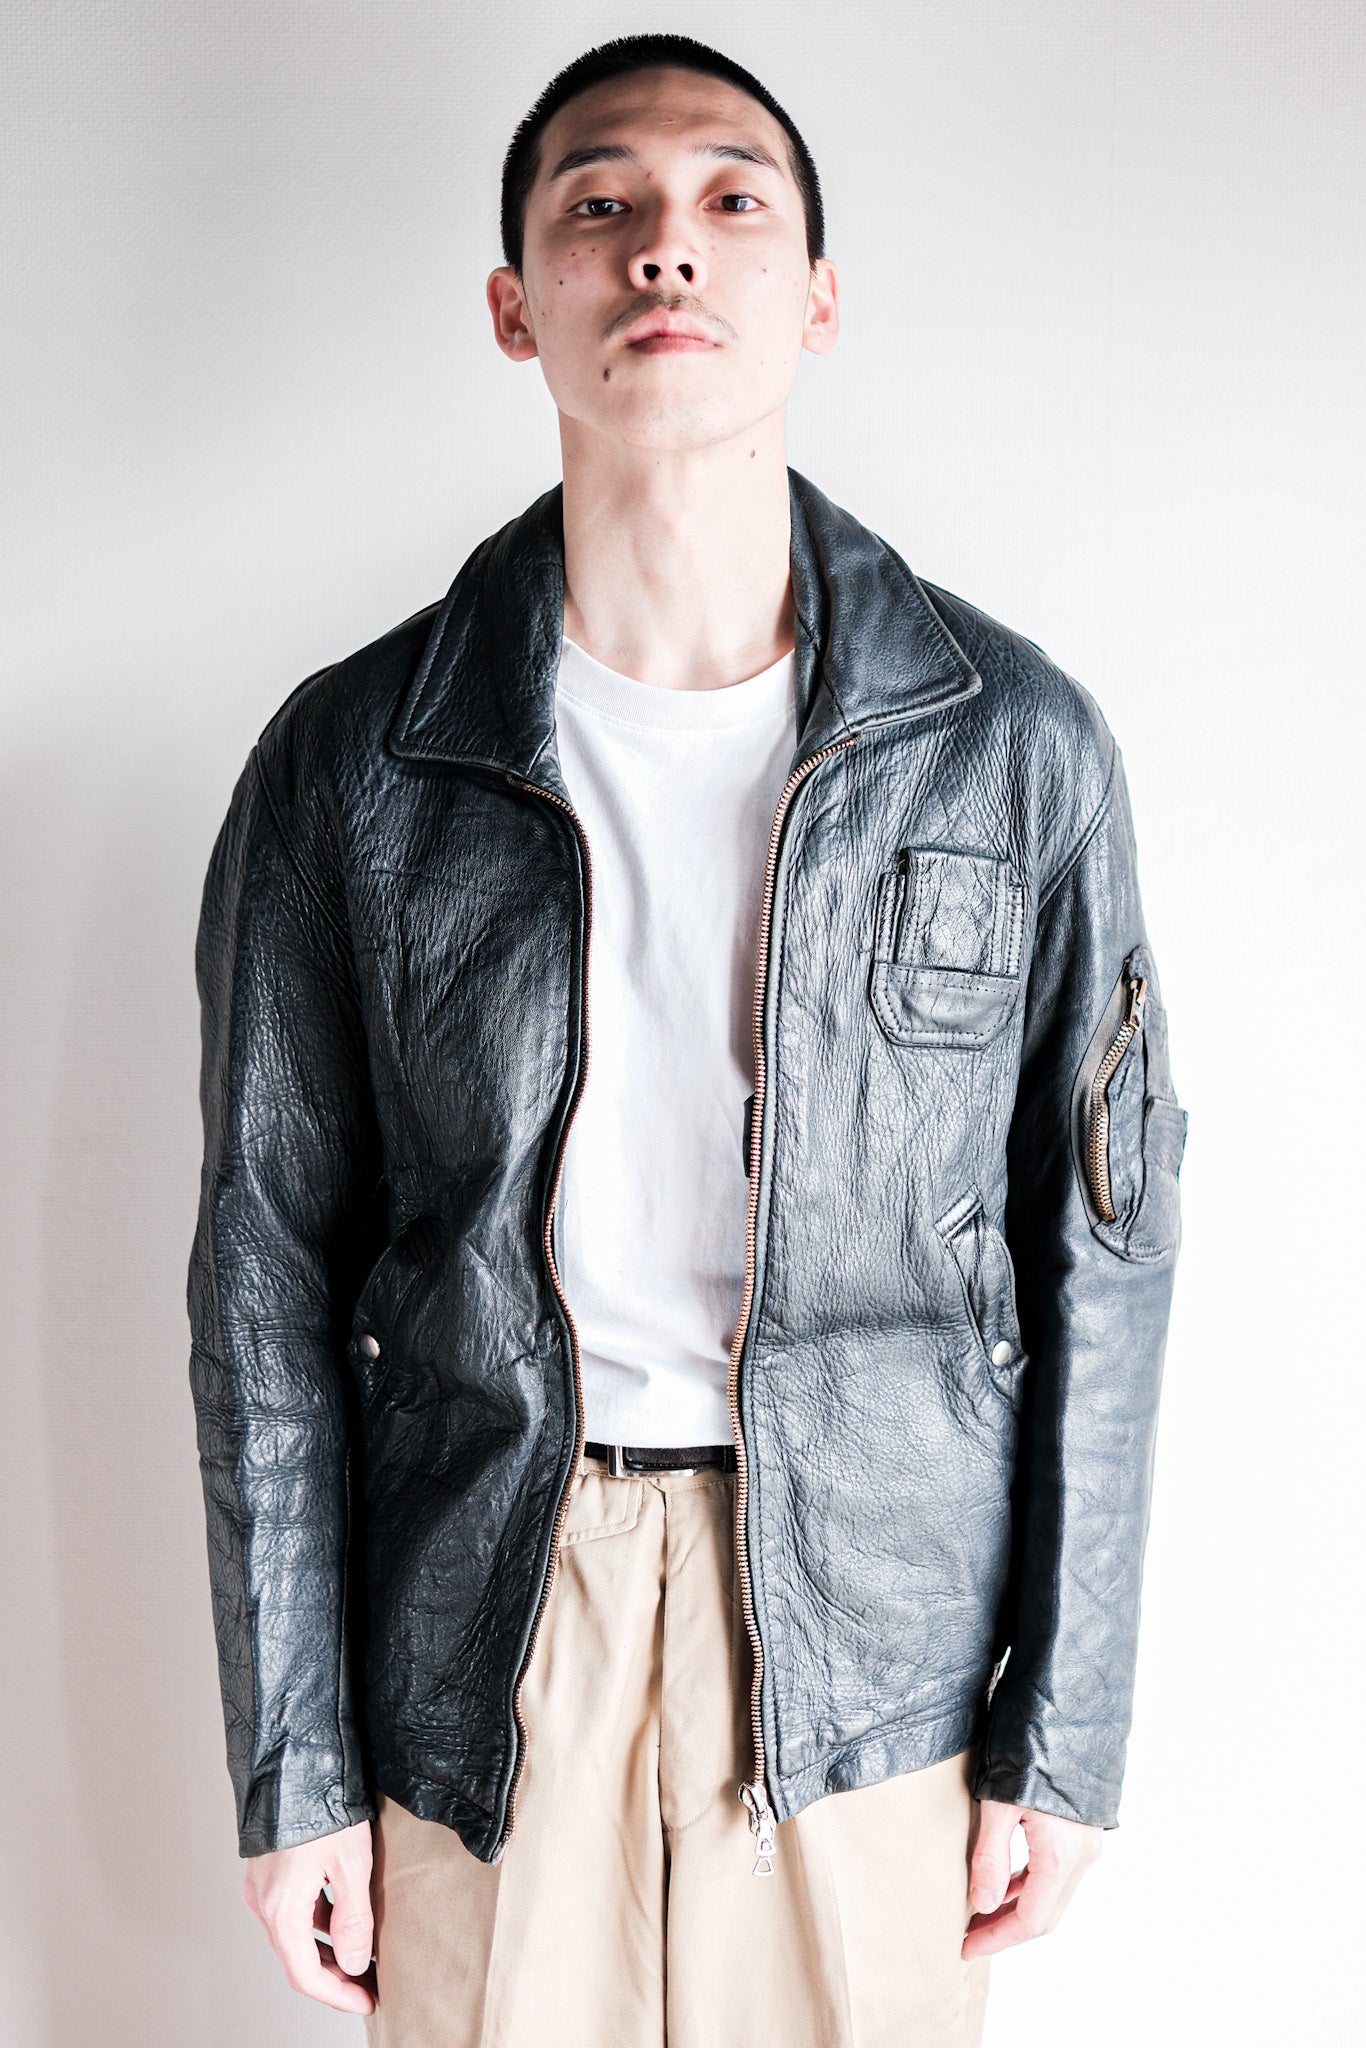 [~ 70's] French Air Force Pilot Leather Jacket